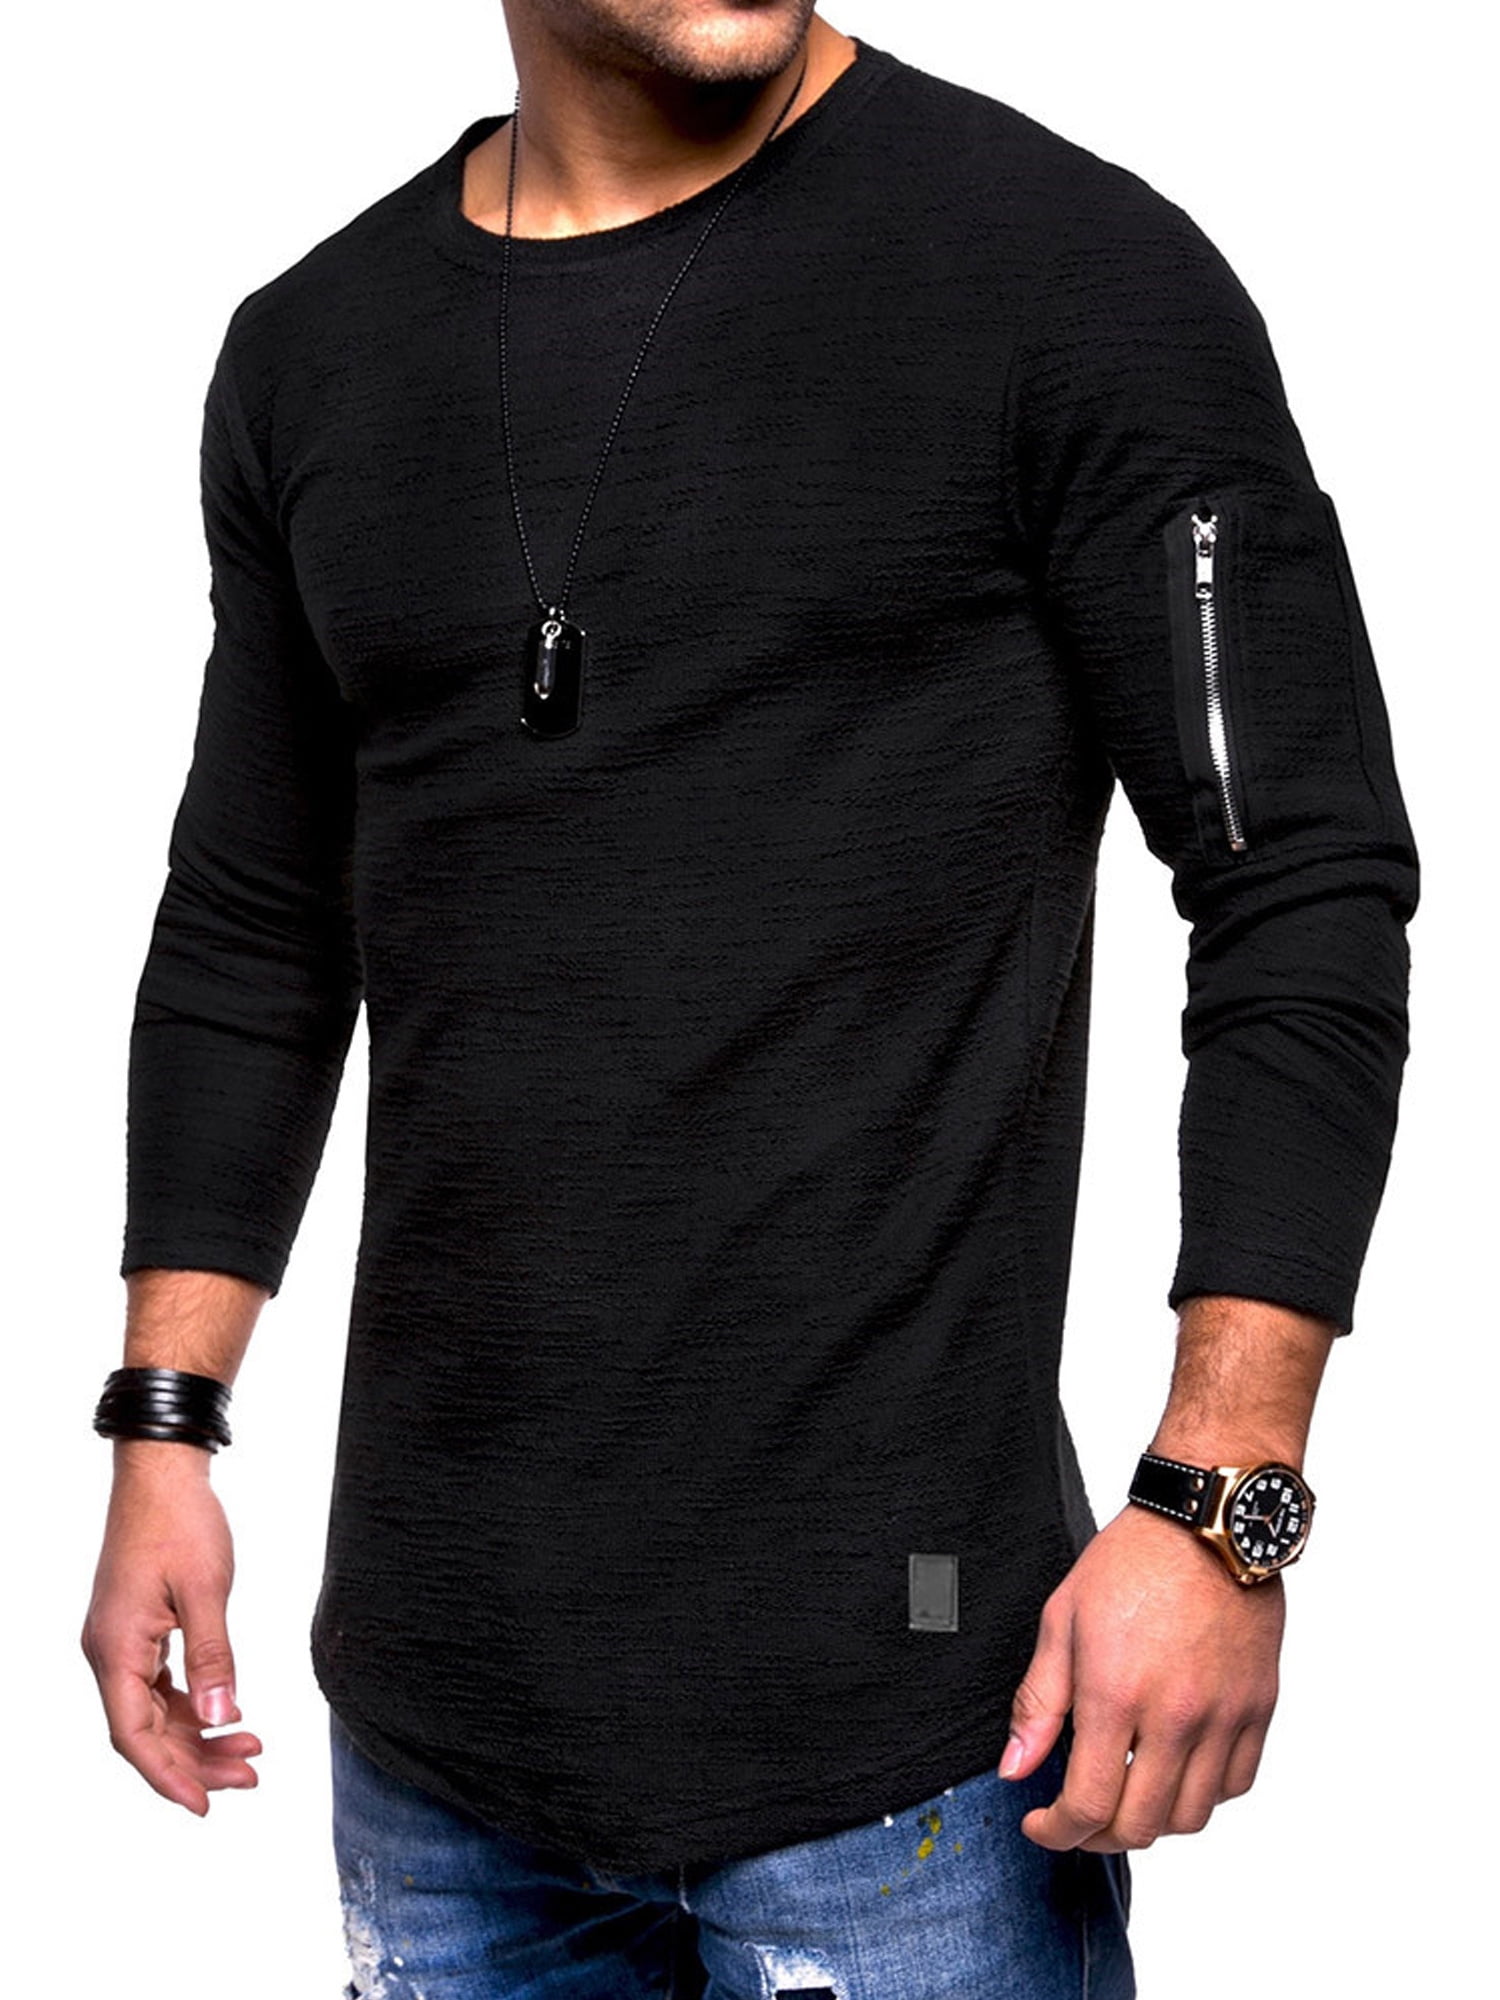 Men Cotton Long Sleeve Round Neck T Shirt Casual Tops Blouse Outdoor Muscle Tee